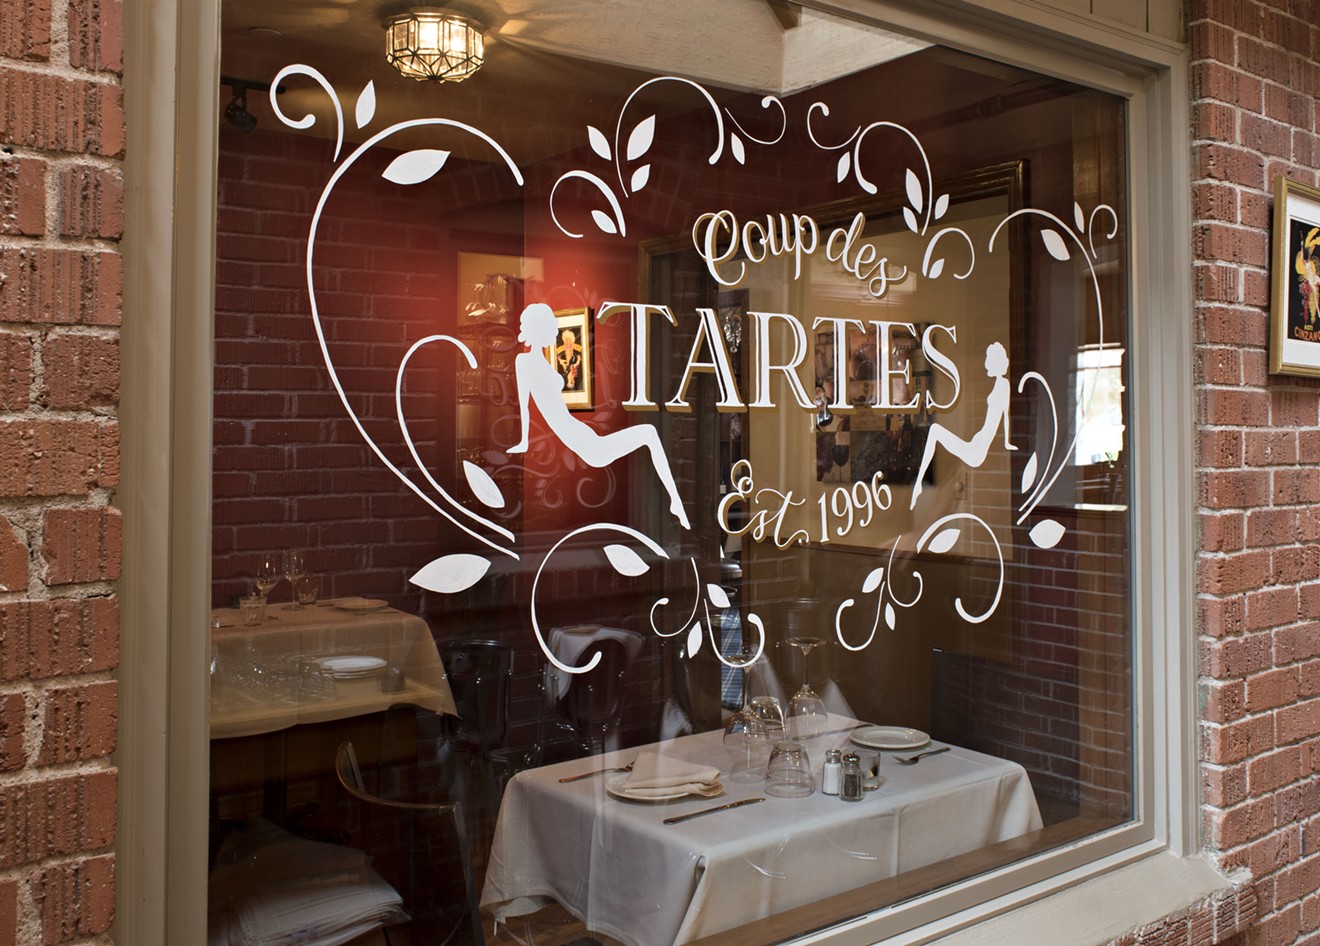 Coup des Tartes will close on January 31.